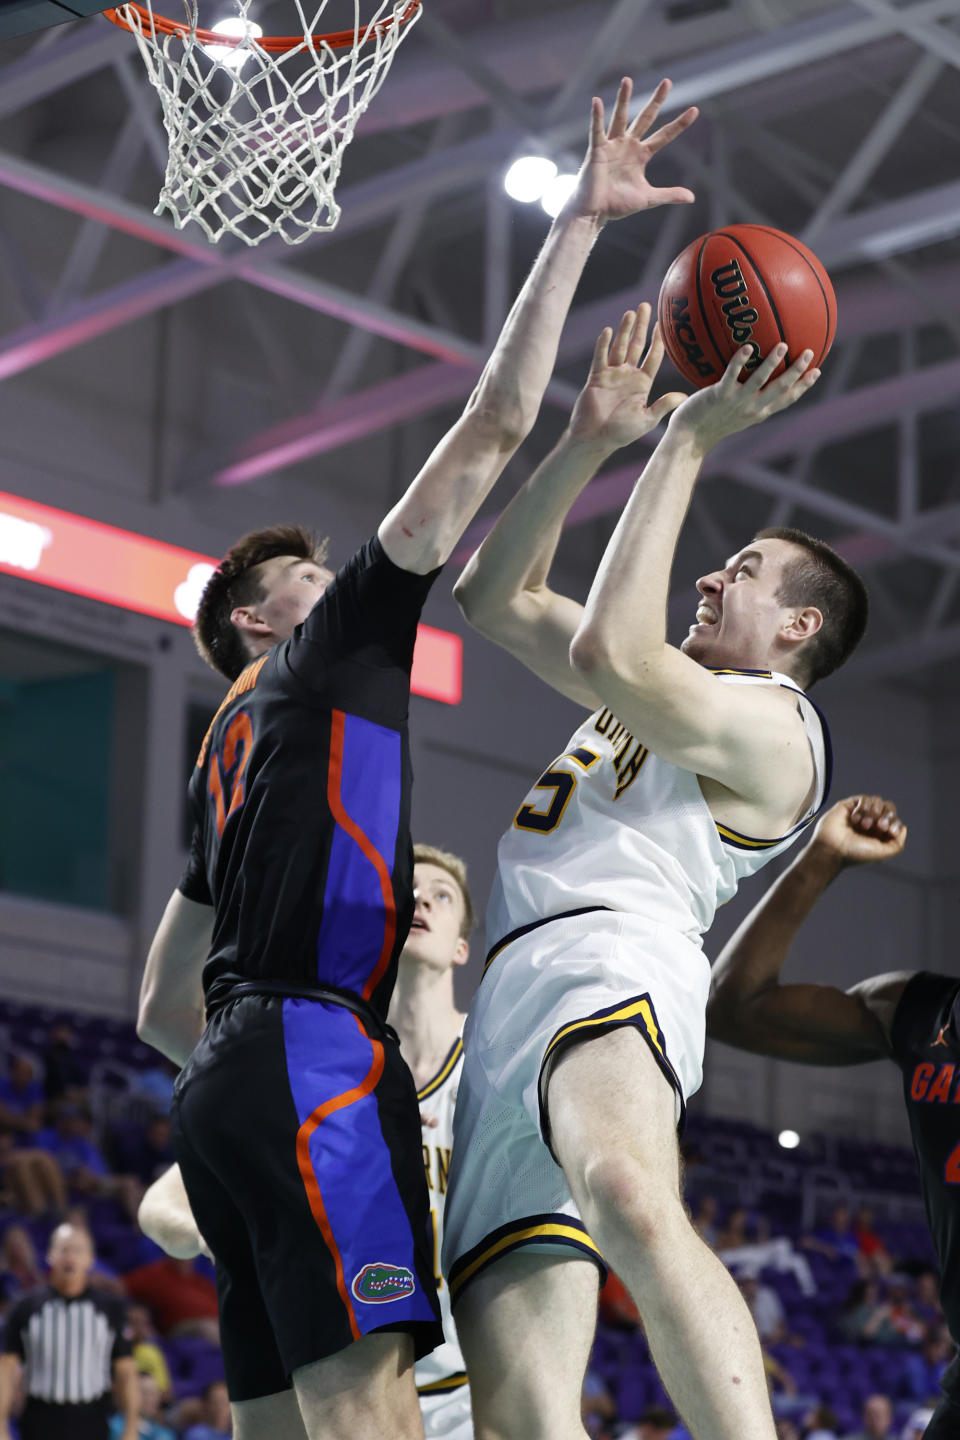 California forward Grant Anticevich, right, drives to the basket past Florida forward Colin Castleton (12) during the second half of an NCAA college basketball game on Monday, Nov. 22, 2021, in Fort Myers, Fla. (AP Photo/Scott Audette)